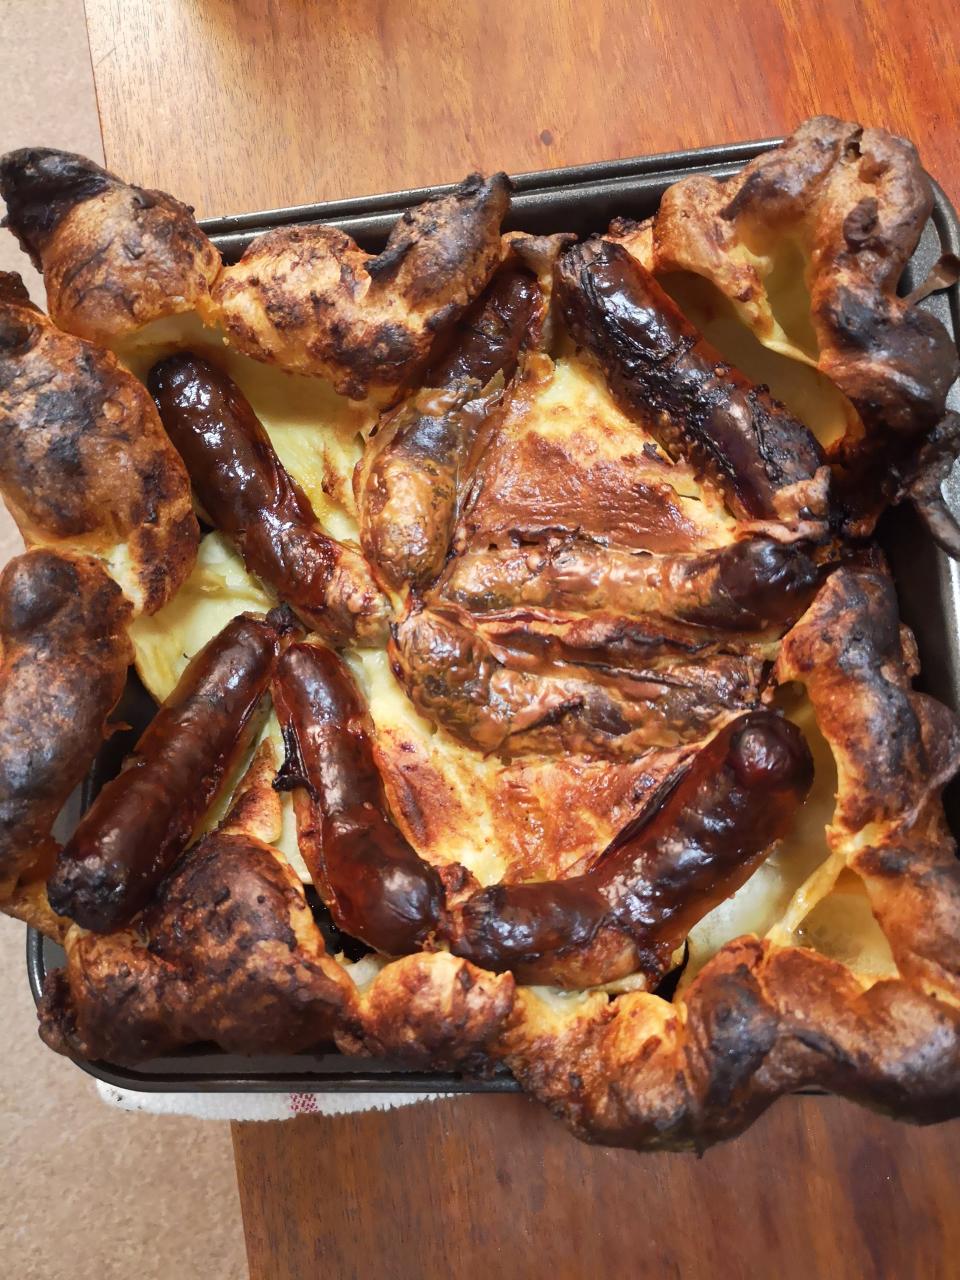 toad in the hole dish with sausages coming out